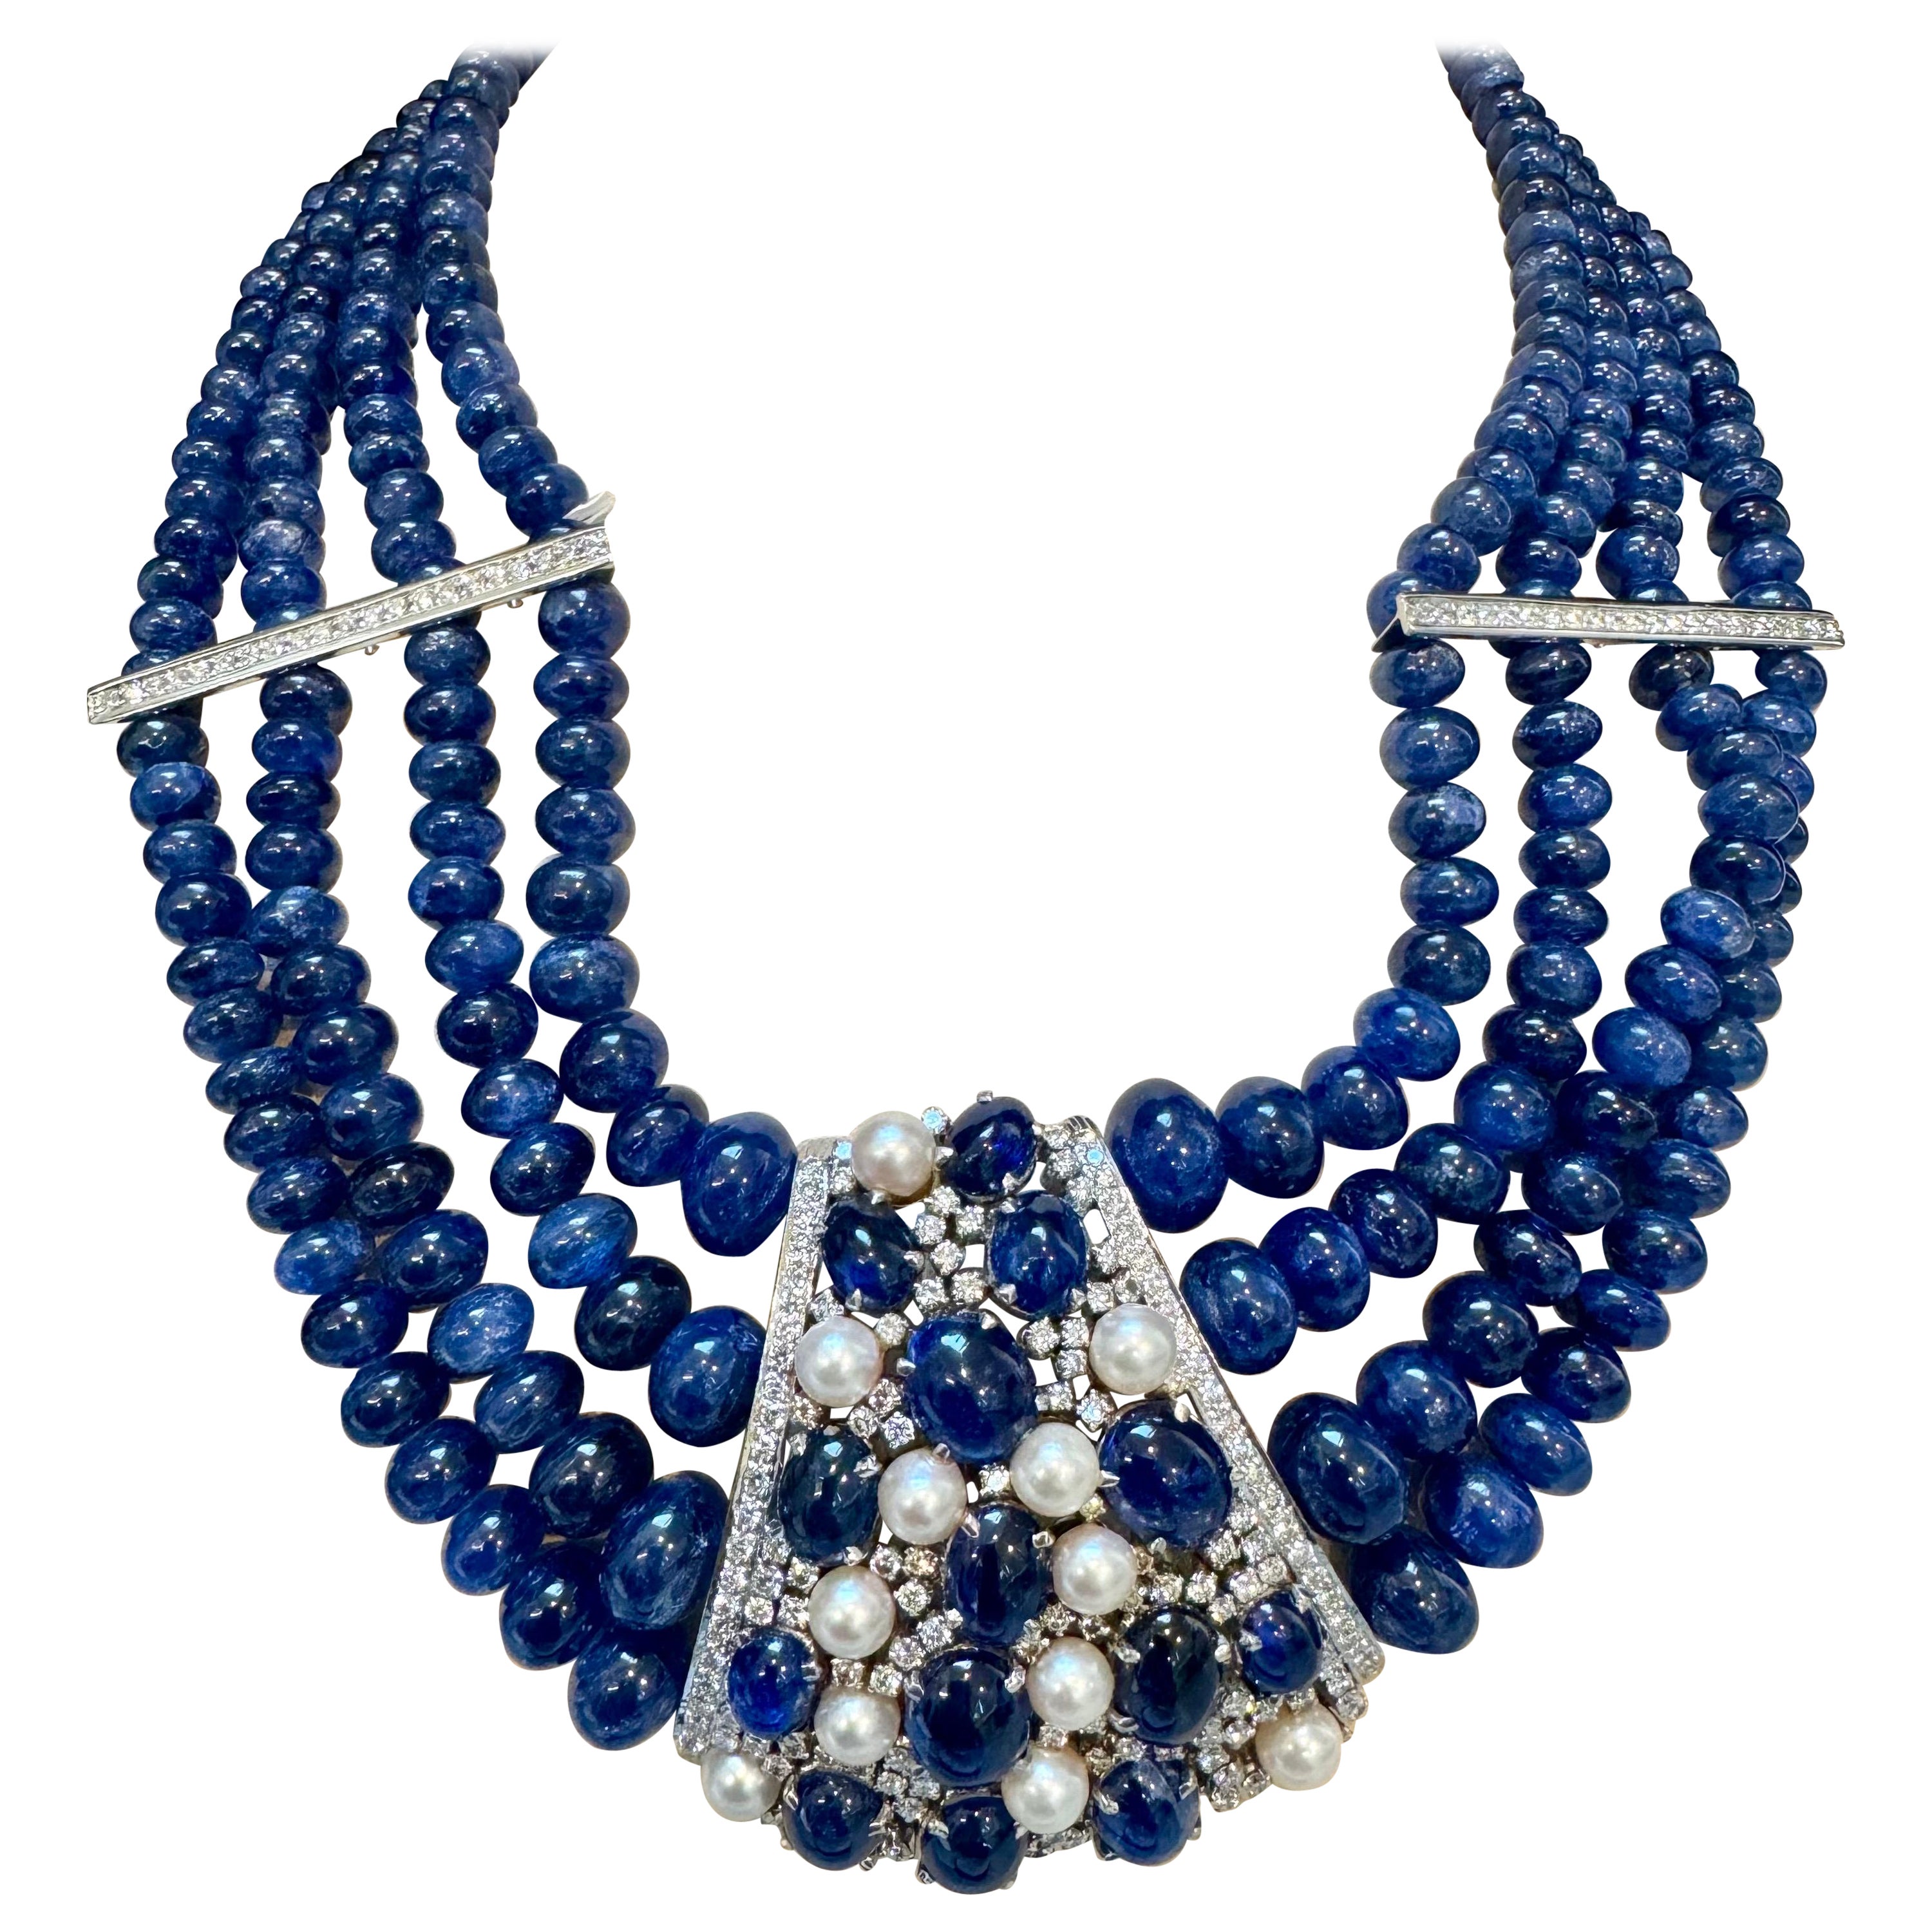 700Ct Sapphire Bead Necklace with cabochon & Diamond Center & Diamond Spacer 18K For Sale